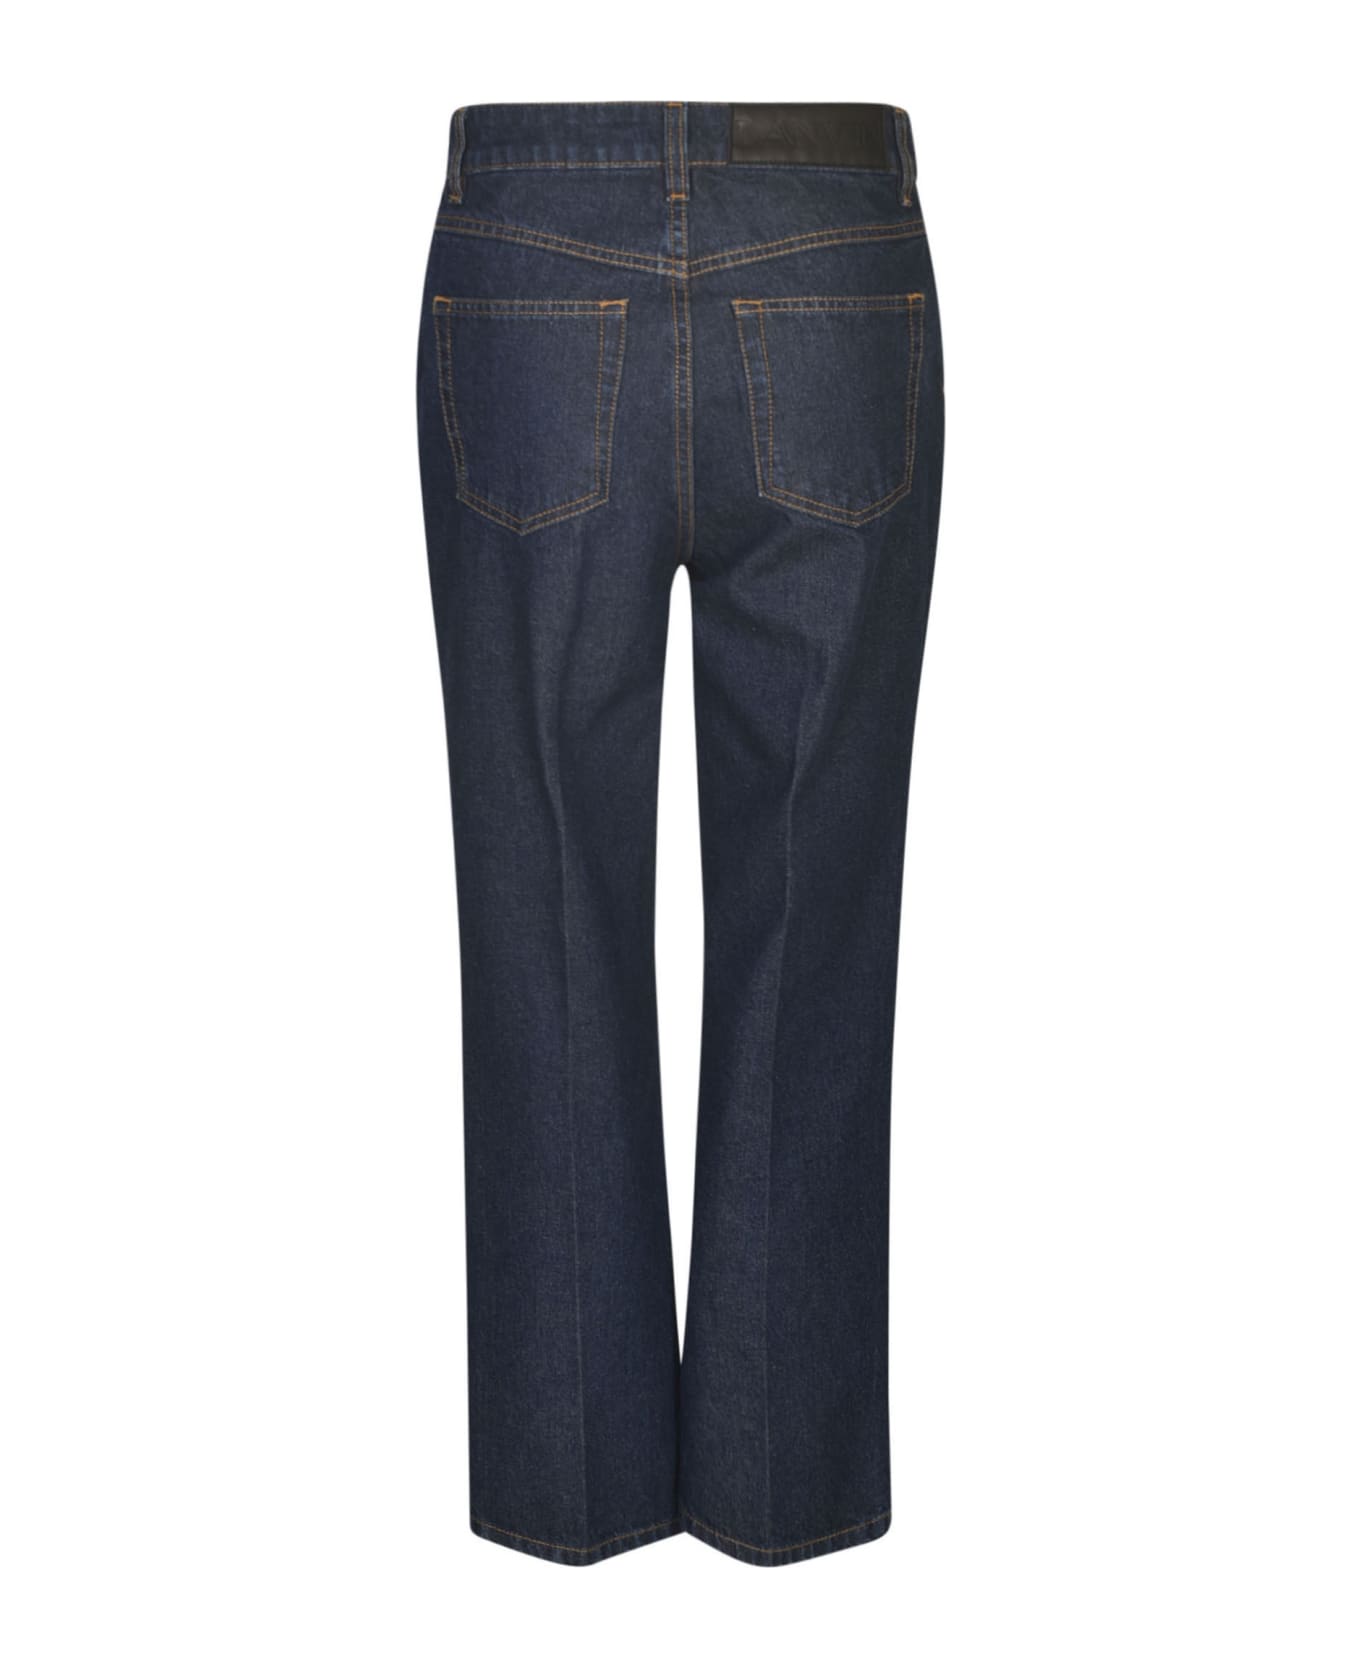 Lanvin Straight Fitted Jeans - Navy